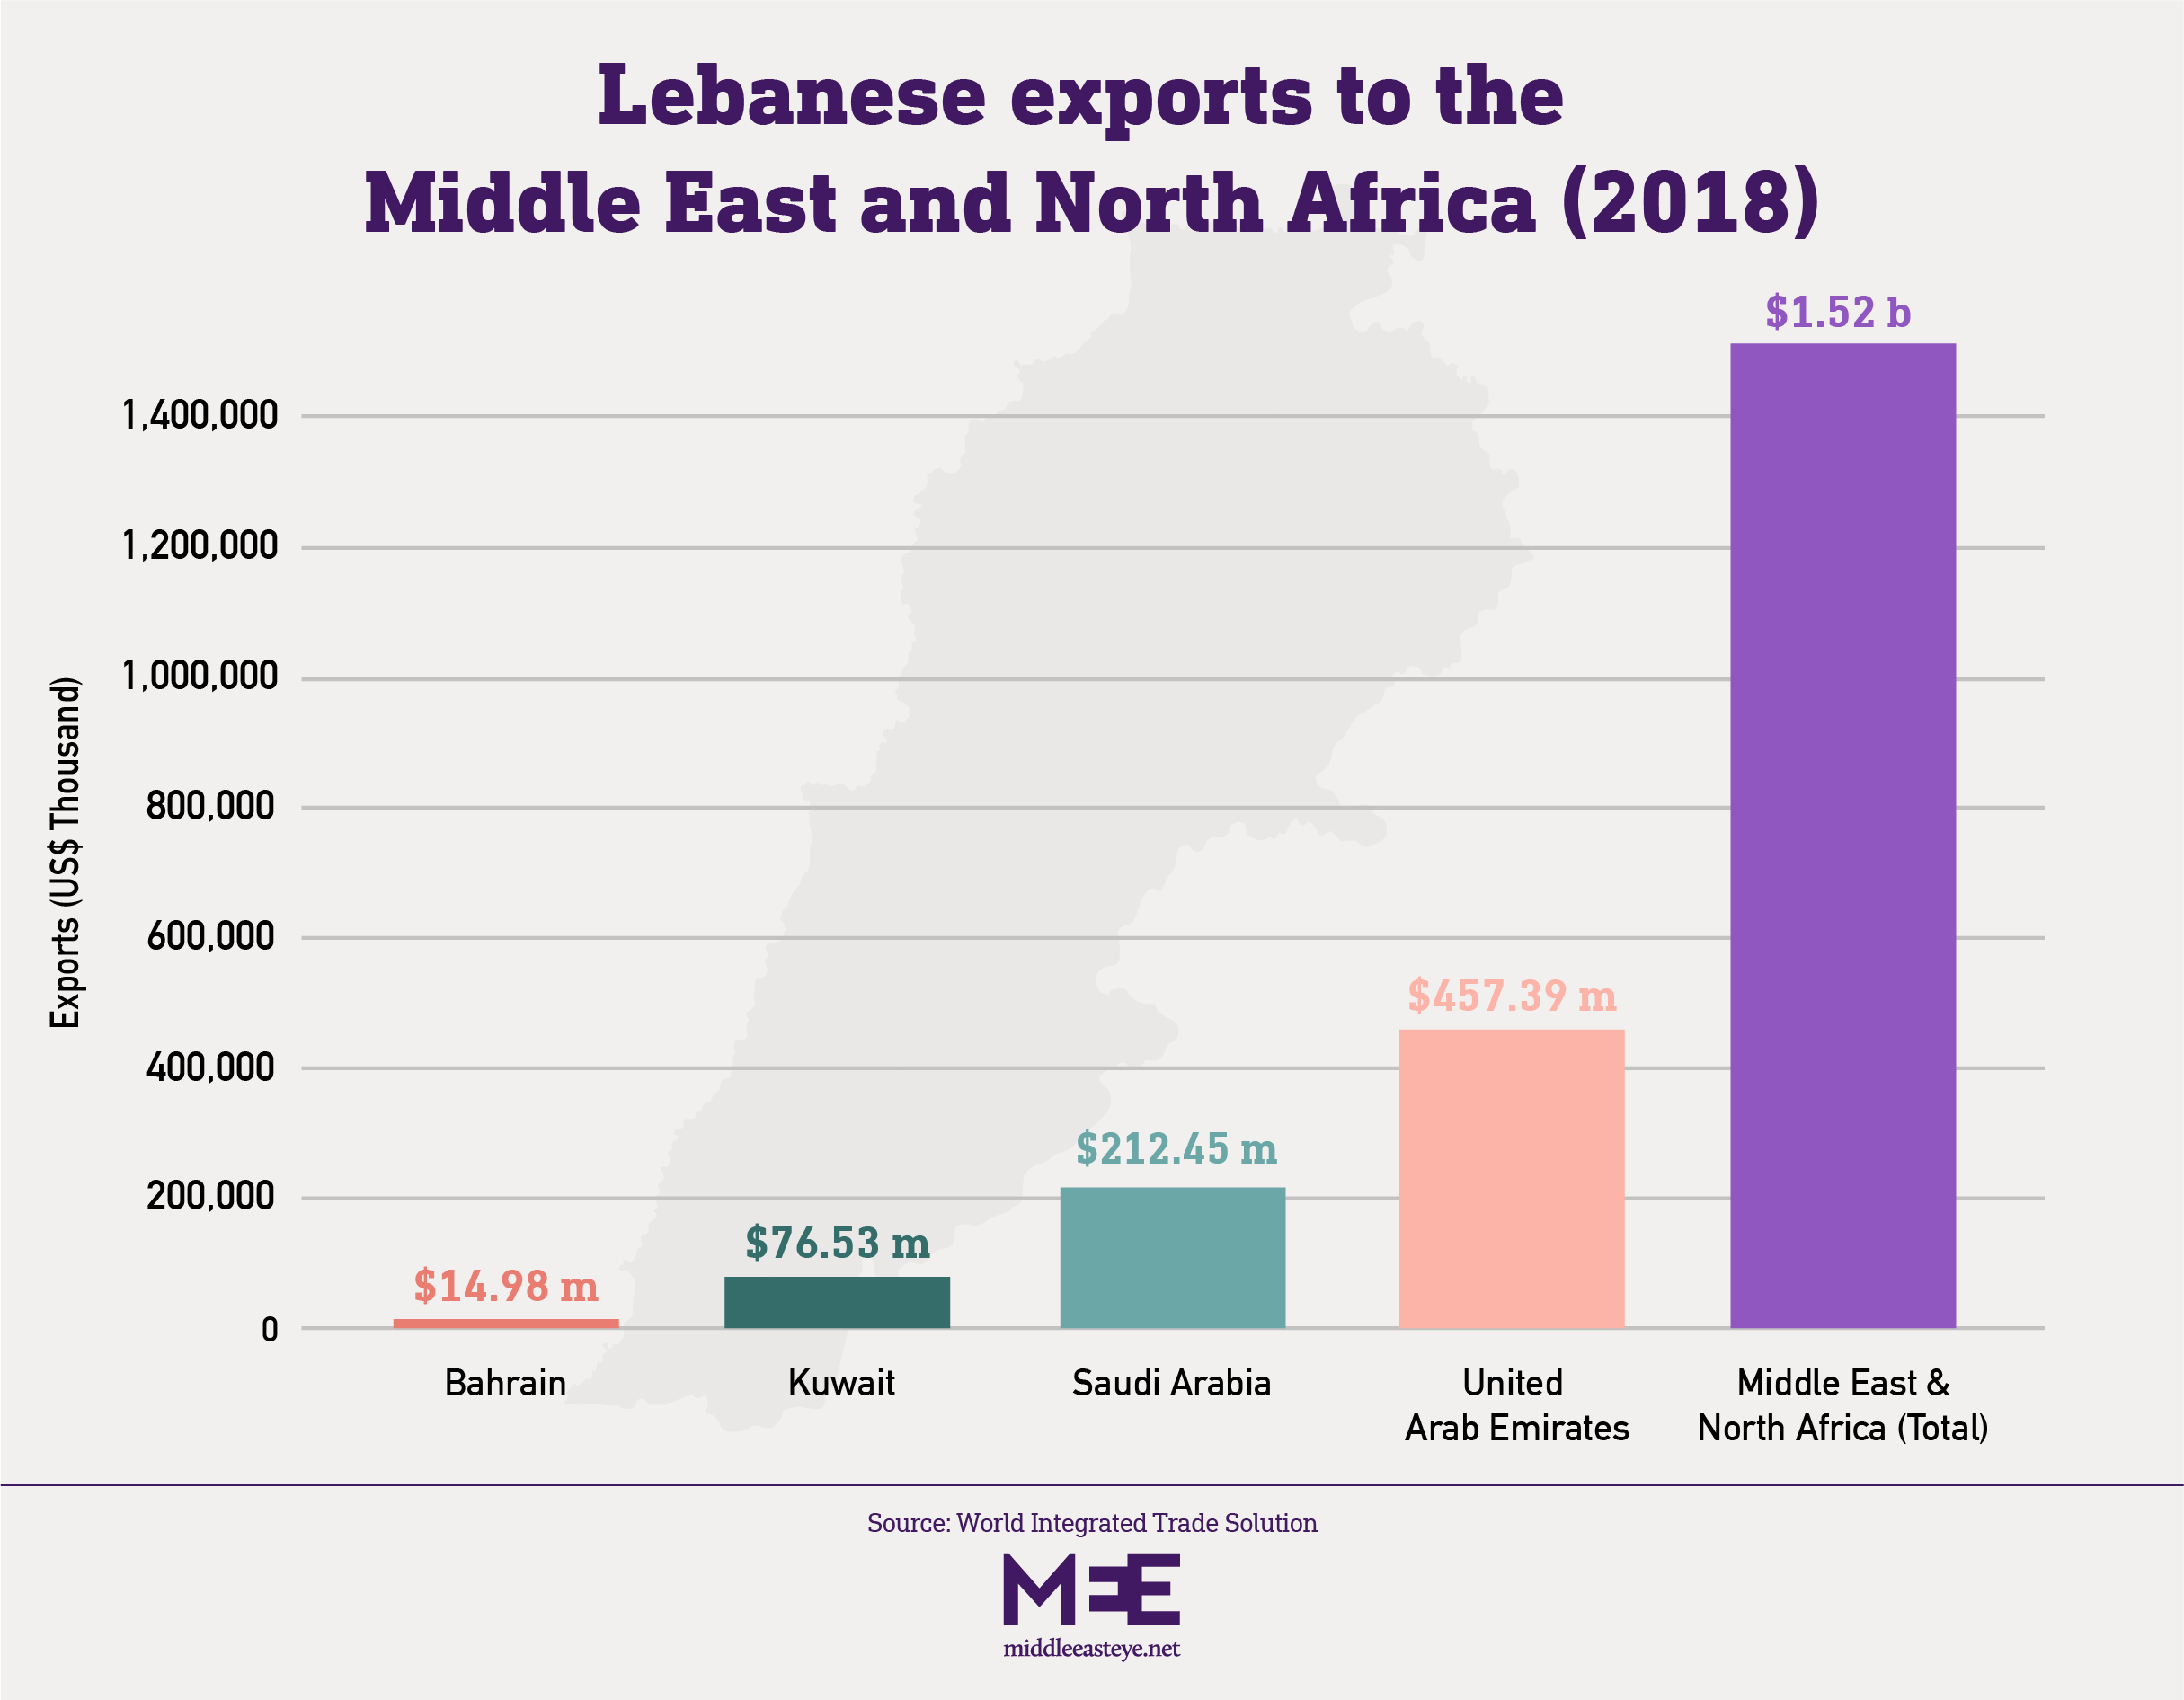 Graphic of Lebanon exports to Gulf countries in 2018